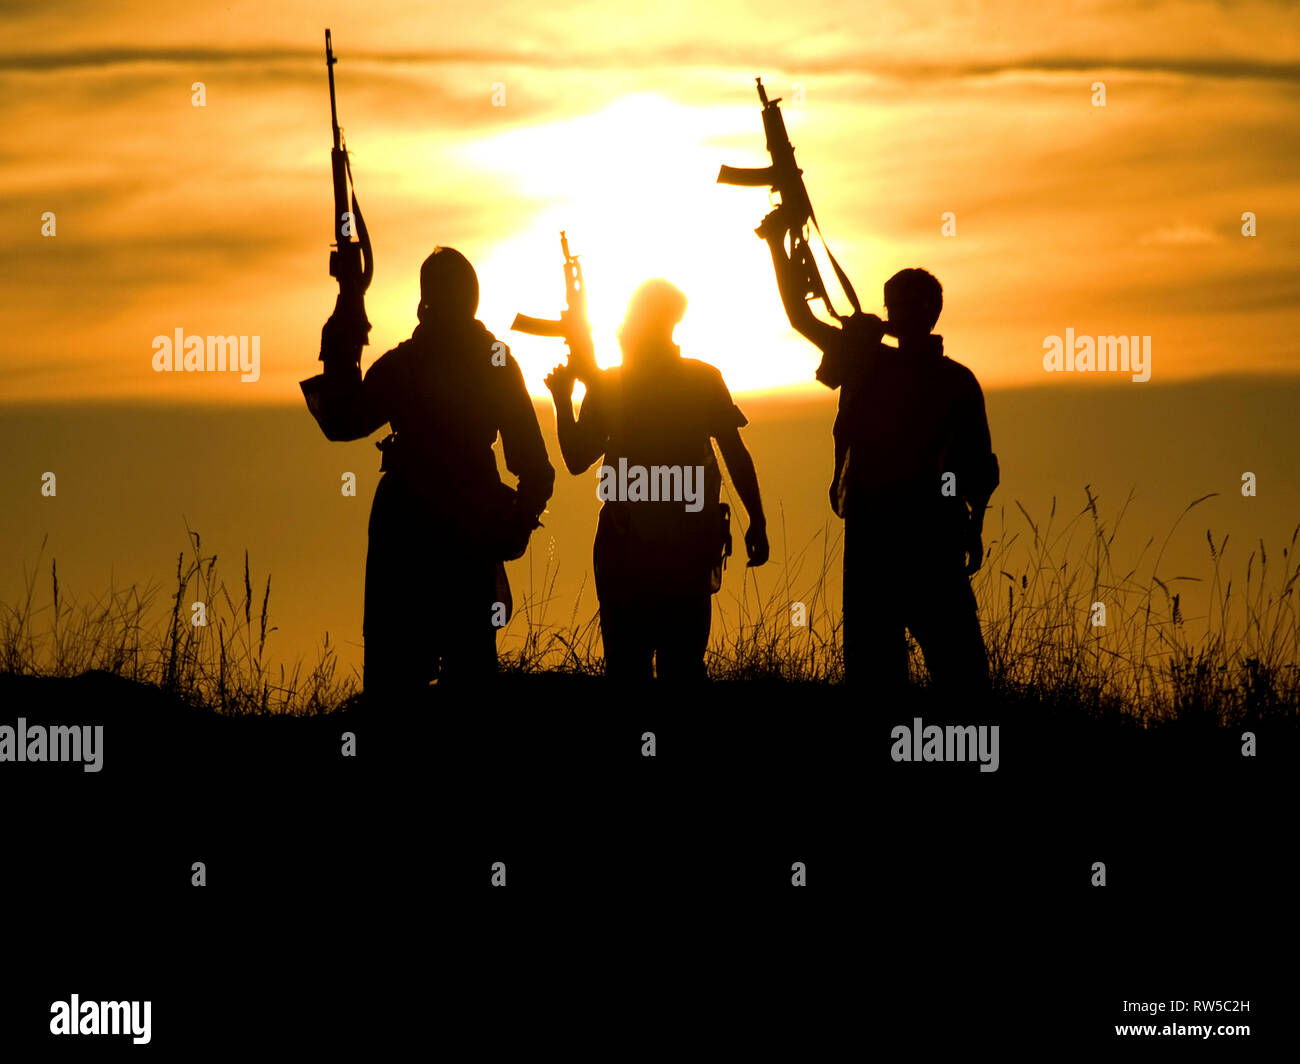 Soldiers against a sunset. Stock Photo